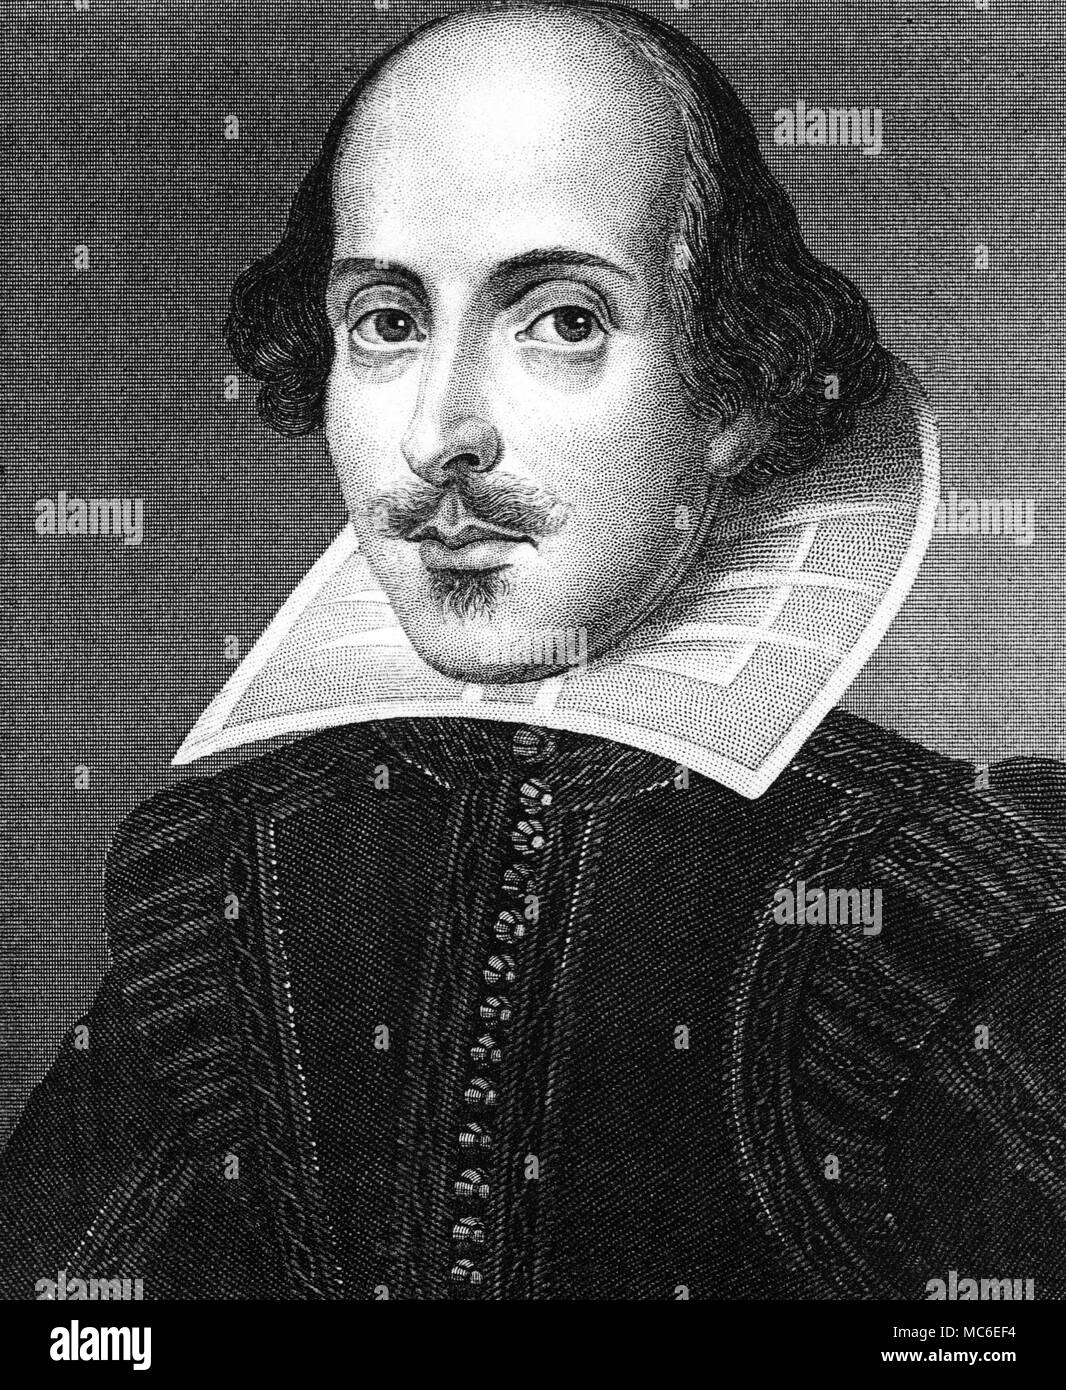 SHAKESPEARE Print of the Martin Droeshout portrait of the Bard. Stock Photo